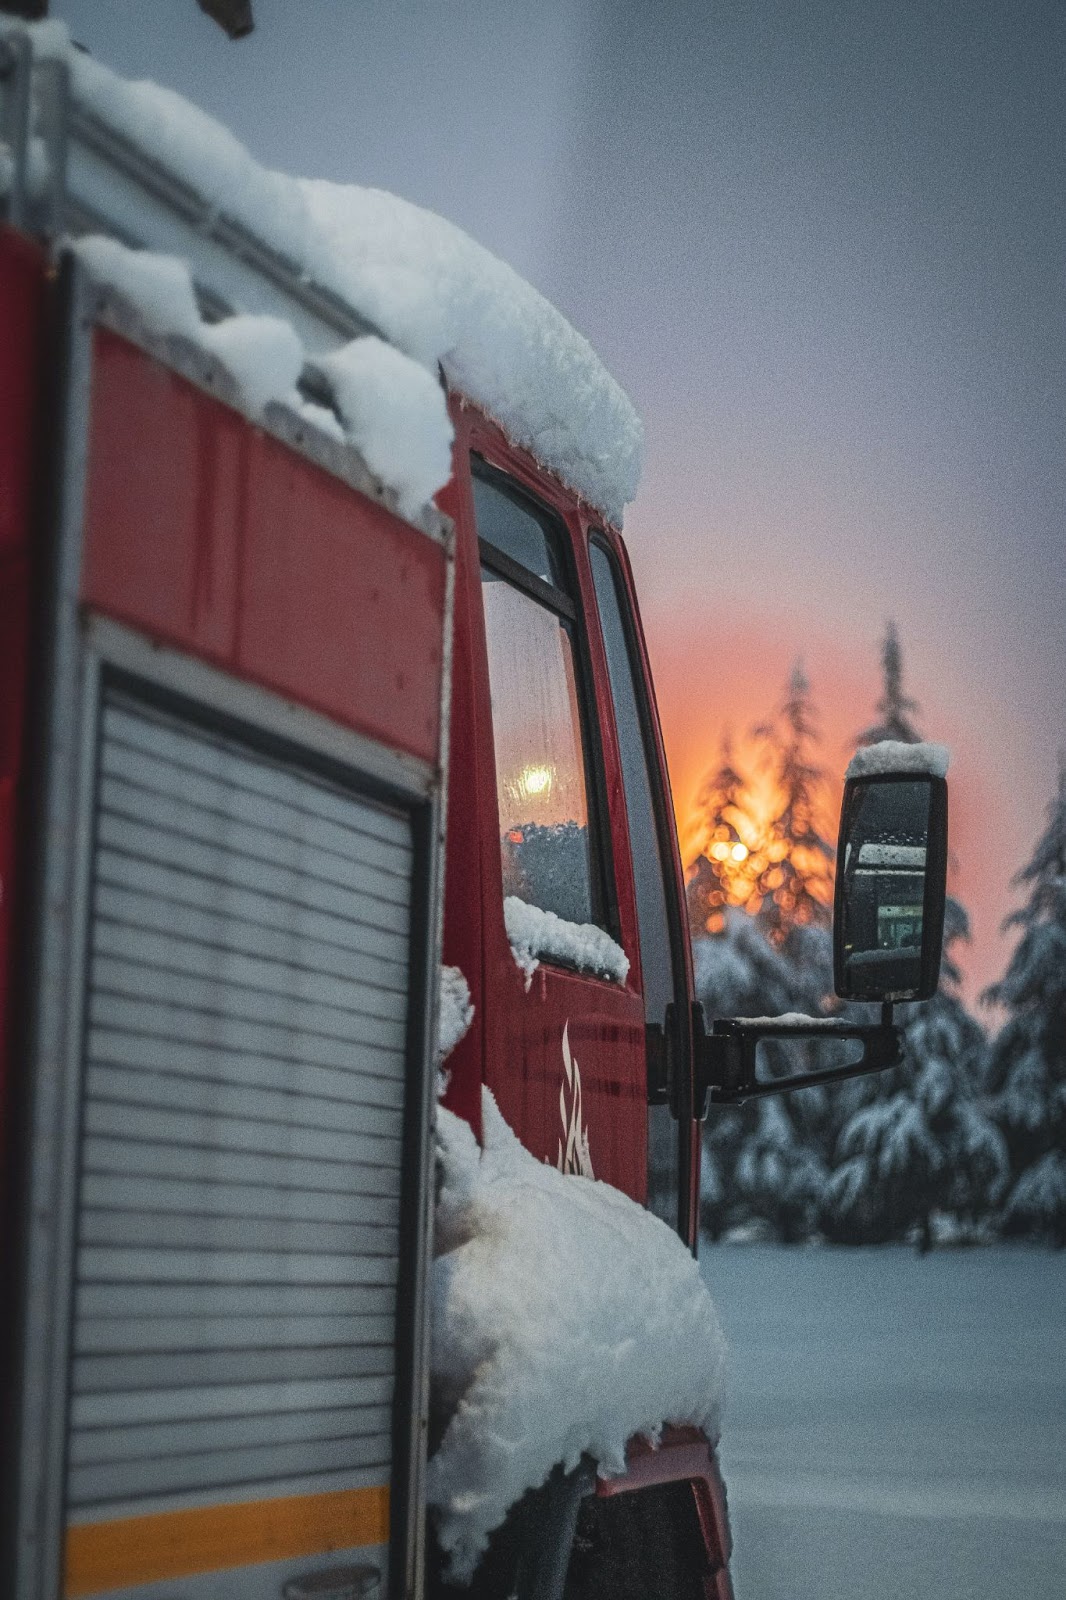 A picture of a snow-covered truck at sunrise